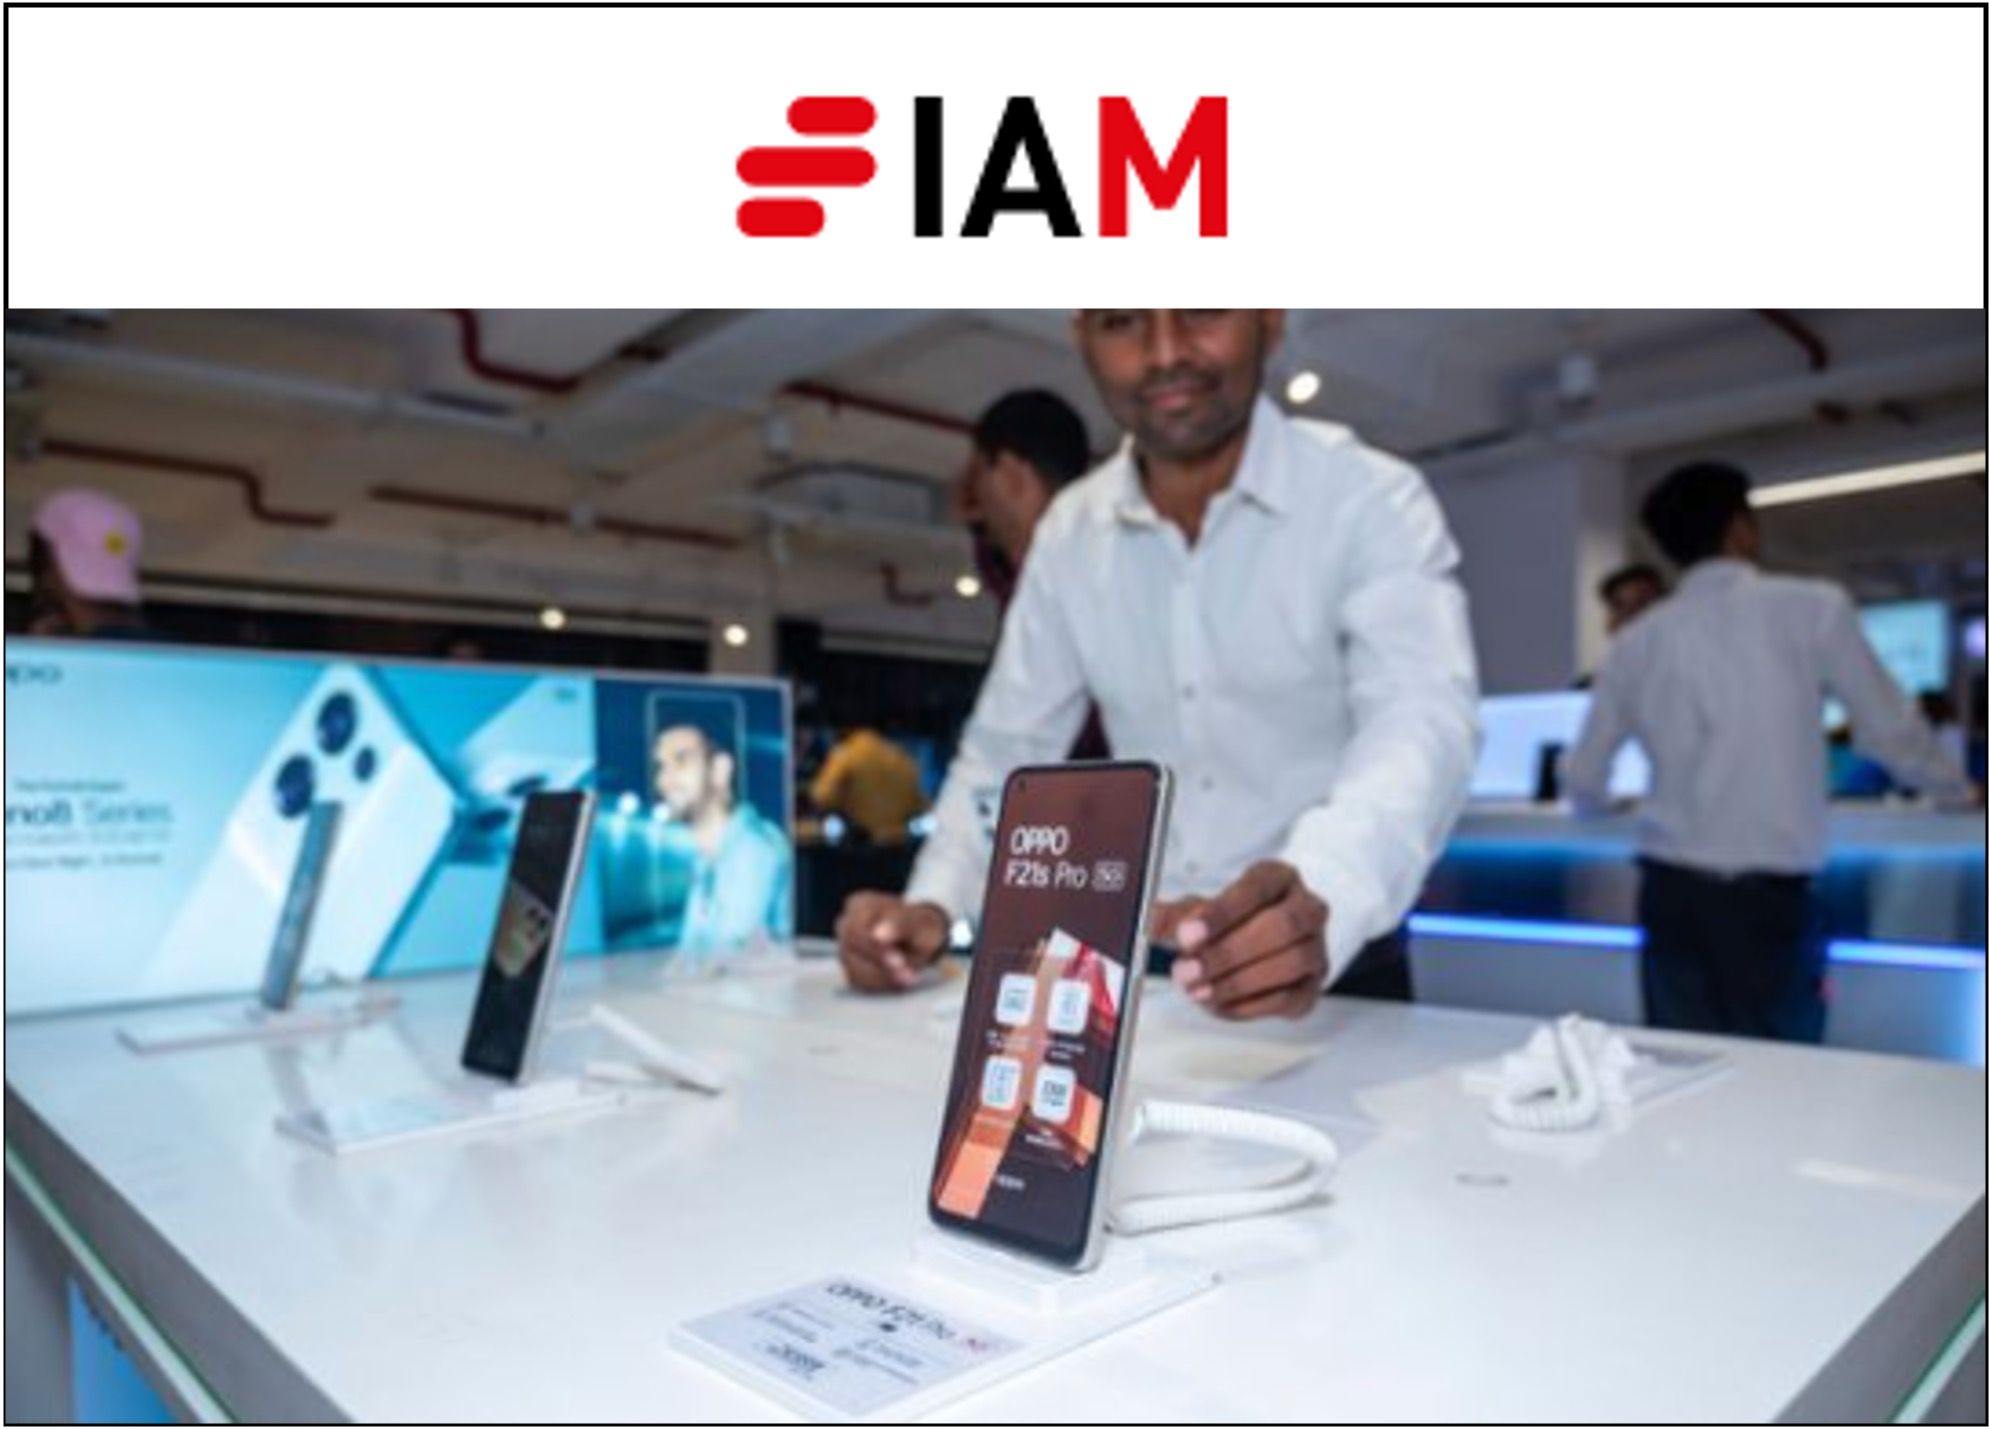 IAM: Oppo joins Via Licensing’s AAC patent pool